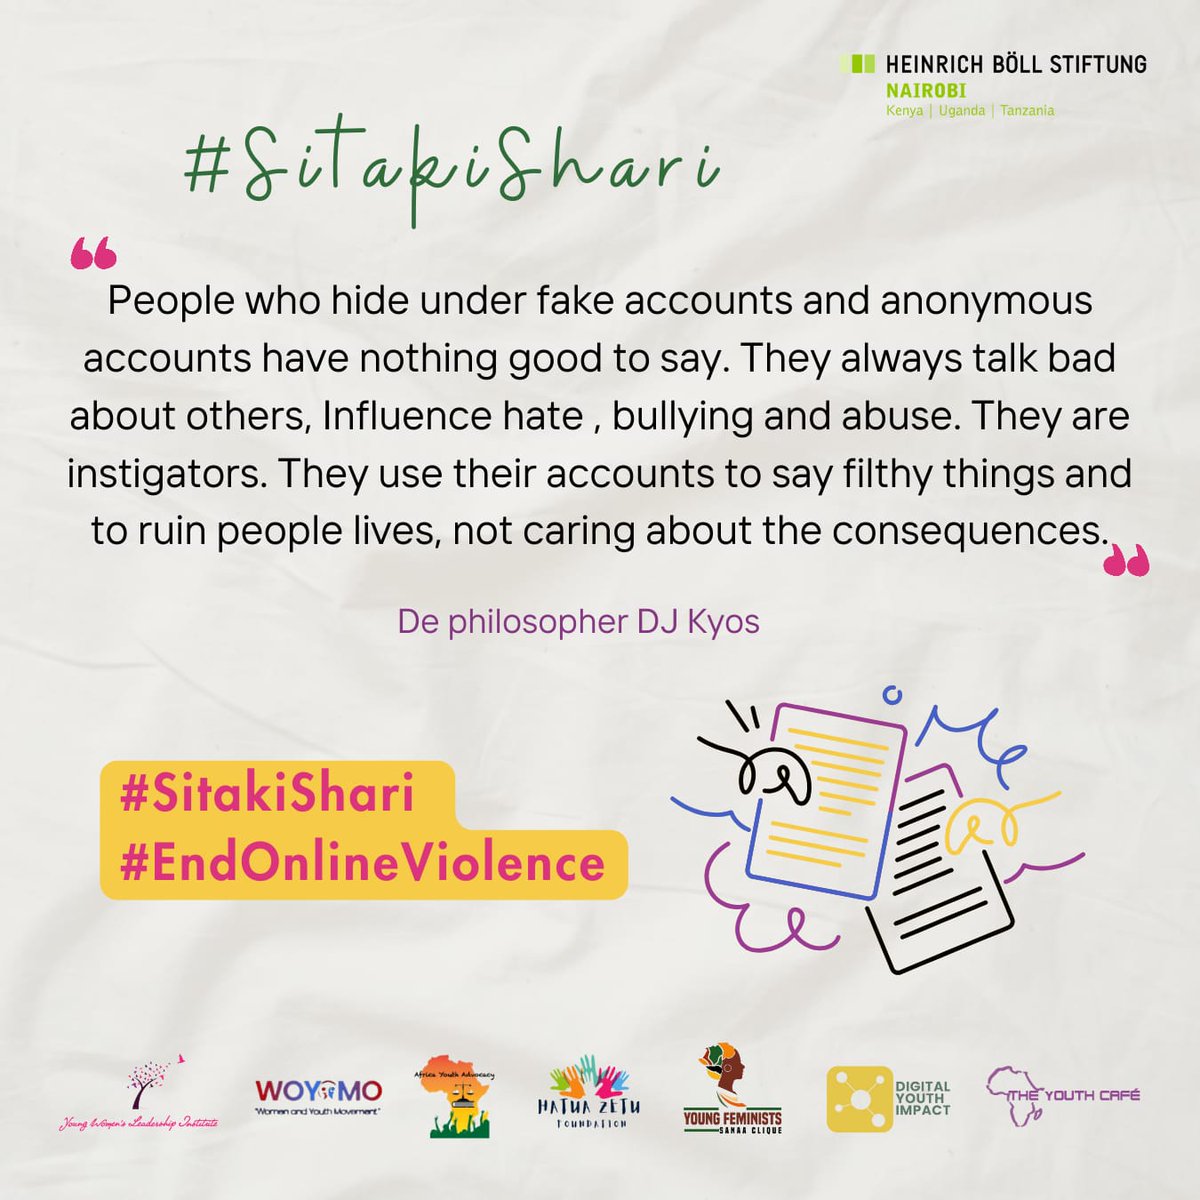 Don't let online bullies dim your shine! Stand up, speak out and take action. Let's create a safer and more supportive online community together #SitakiShari #OnlineSafety #EndOnlineViolence @TheYouthCafe @Hatuazetuf @HBSNairobi @theayai @WOYOMO_TZ @ywli_info @DigitalimpactTz